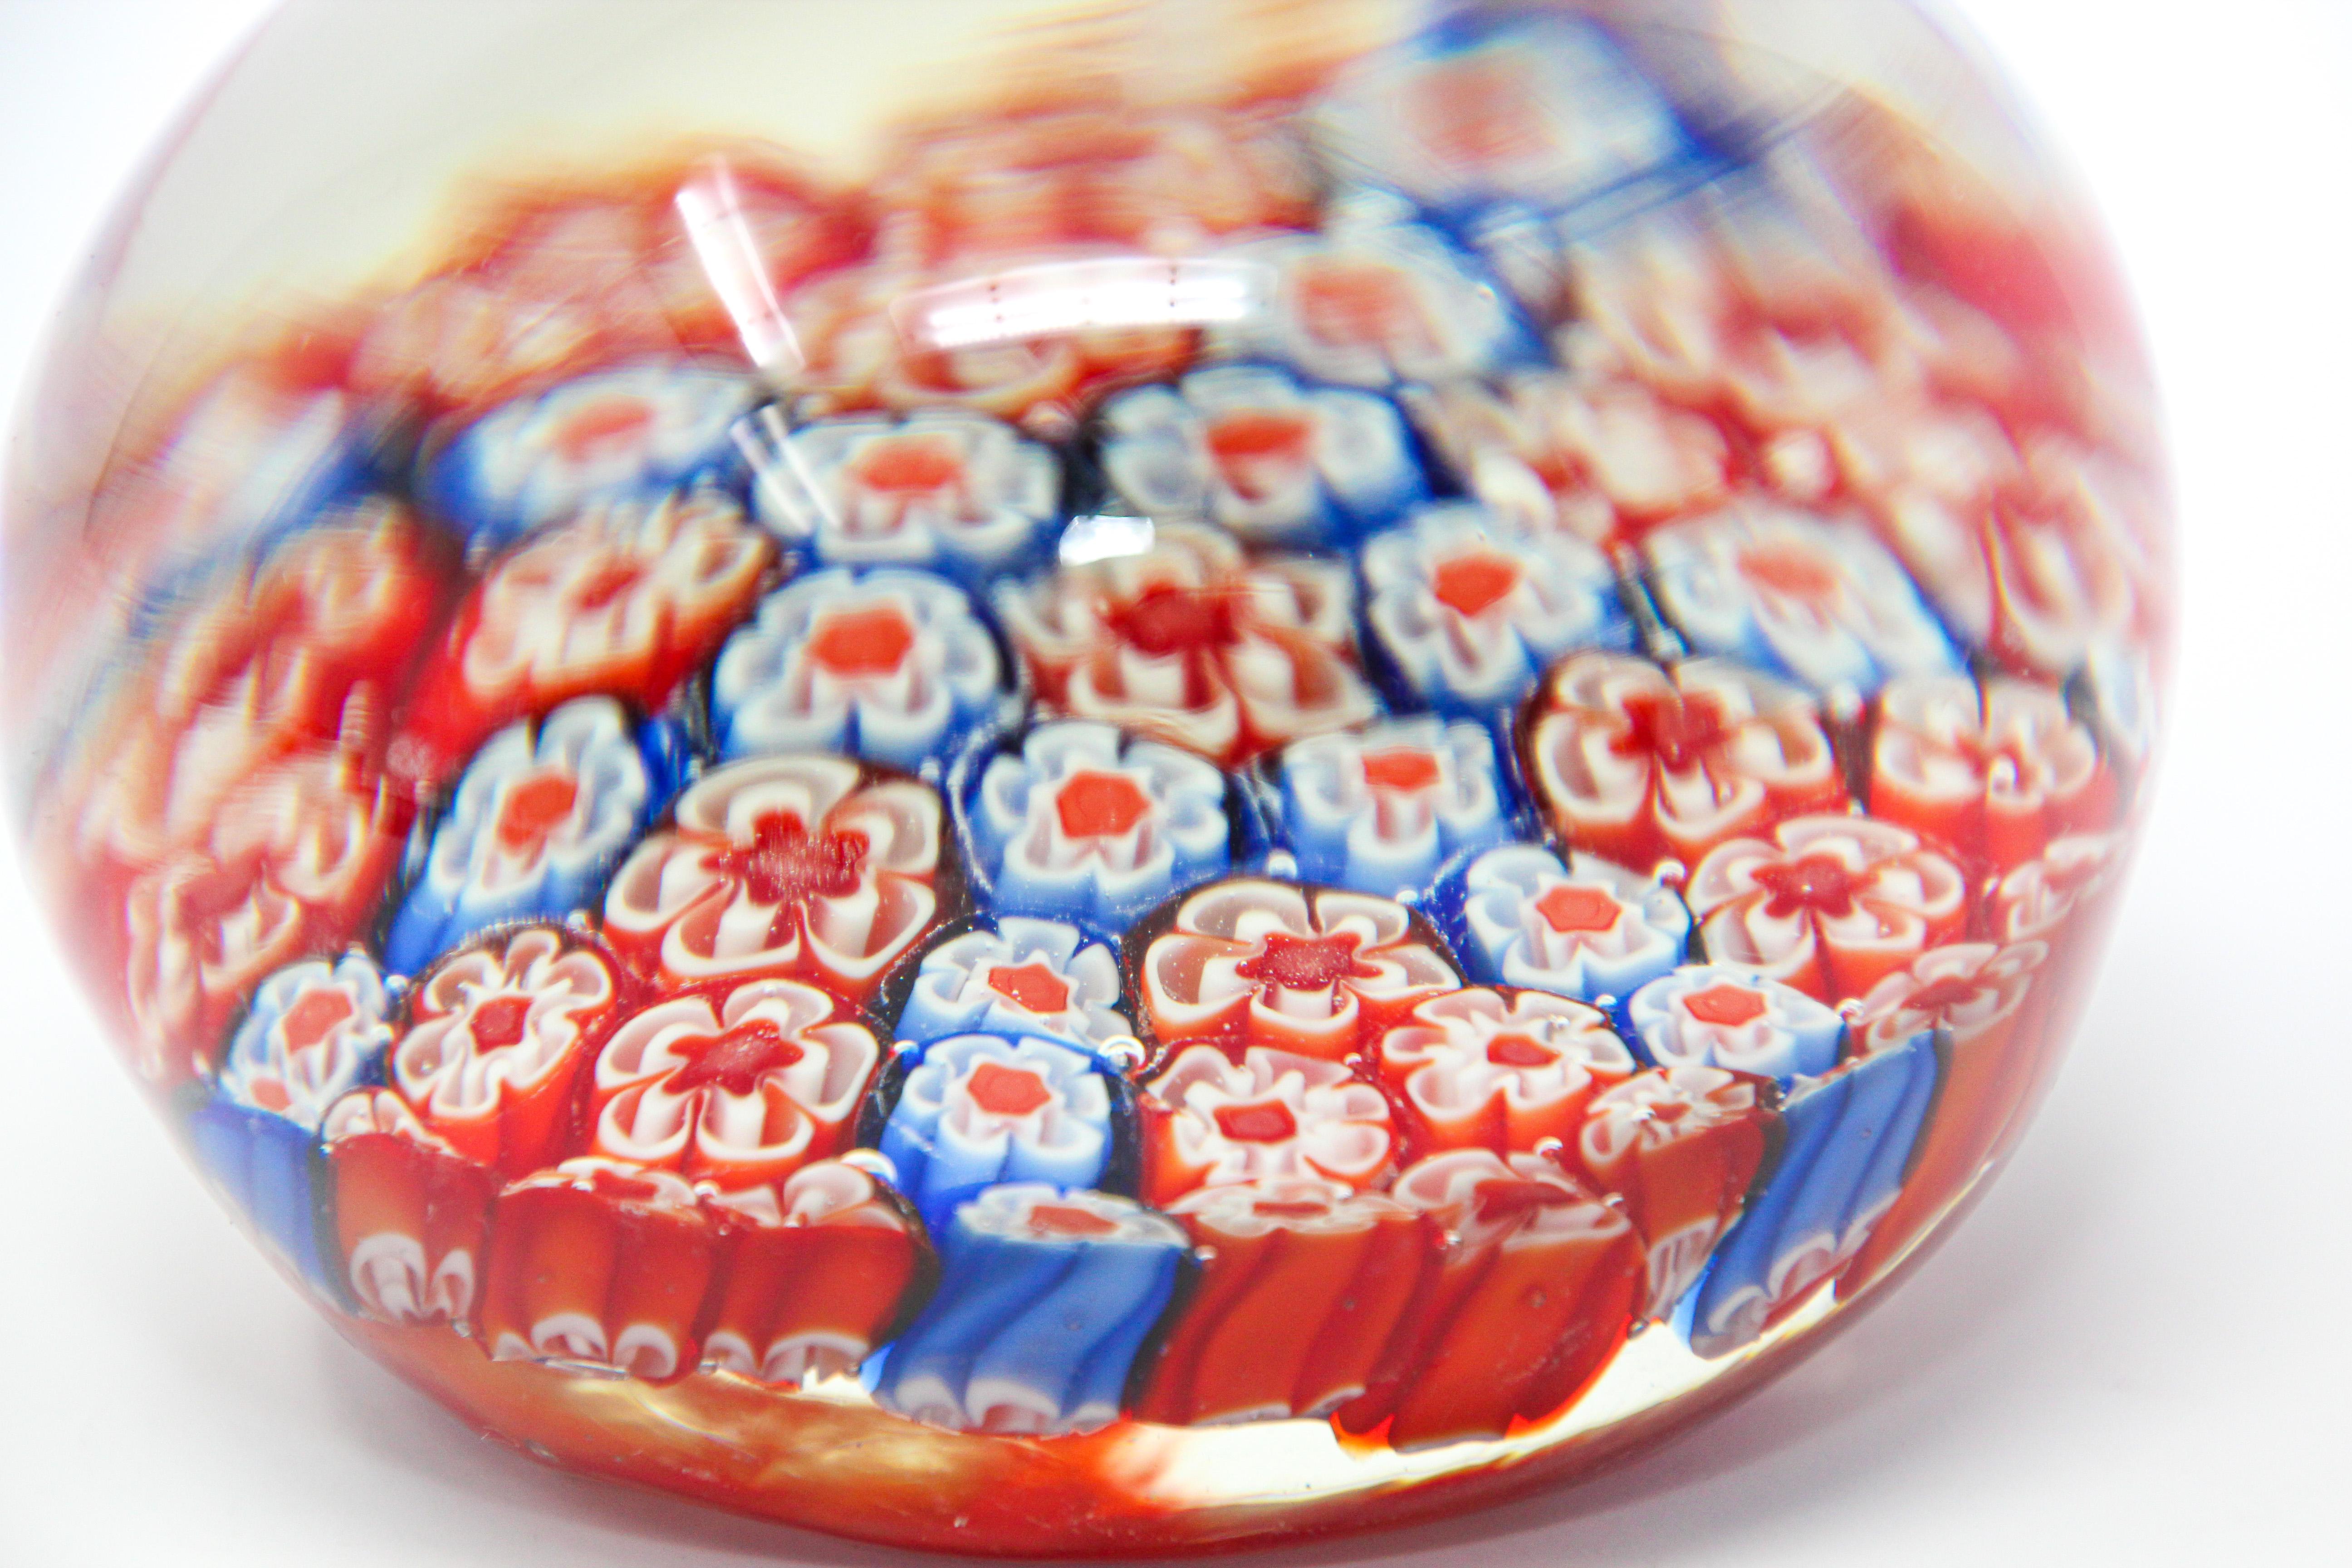 Millefiori Italian art glass paperweight
Beautiful glass art paperweight in millefiori design in various shades of blues, red and white, accenting the close concentric complex.
Murano glass hand blown in beautiful Millefiori (a thousand flowers)